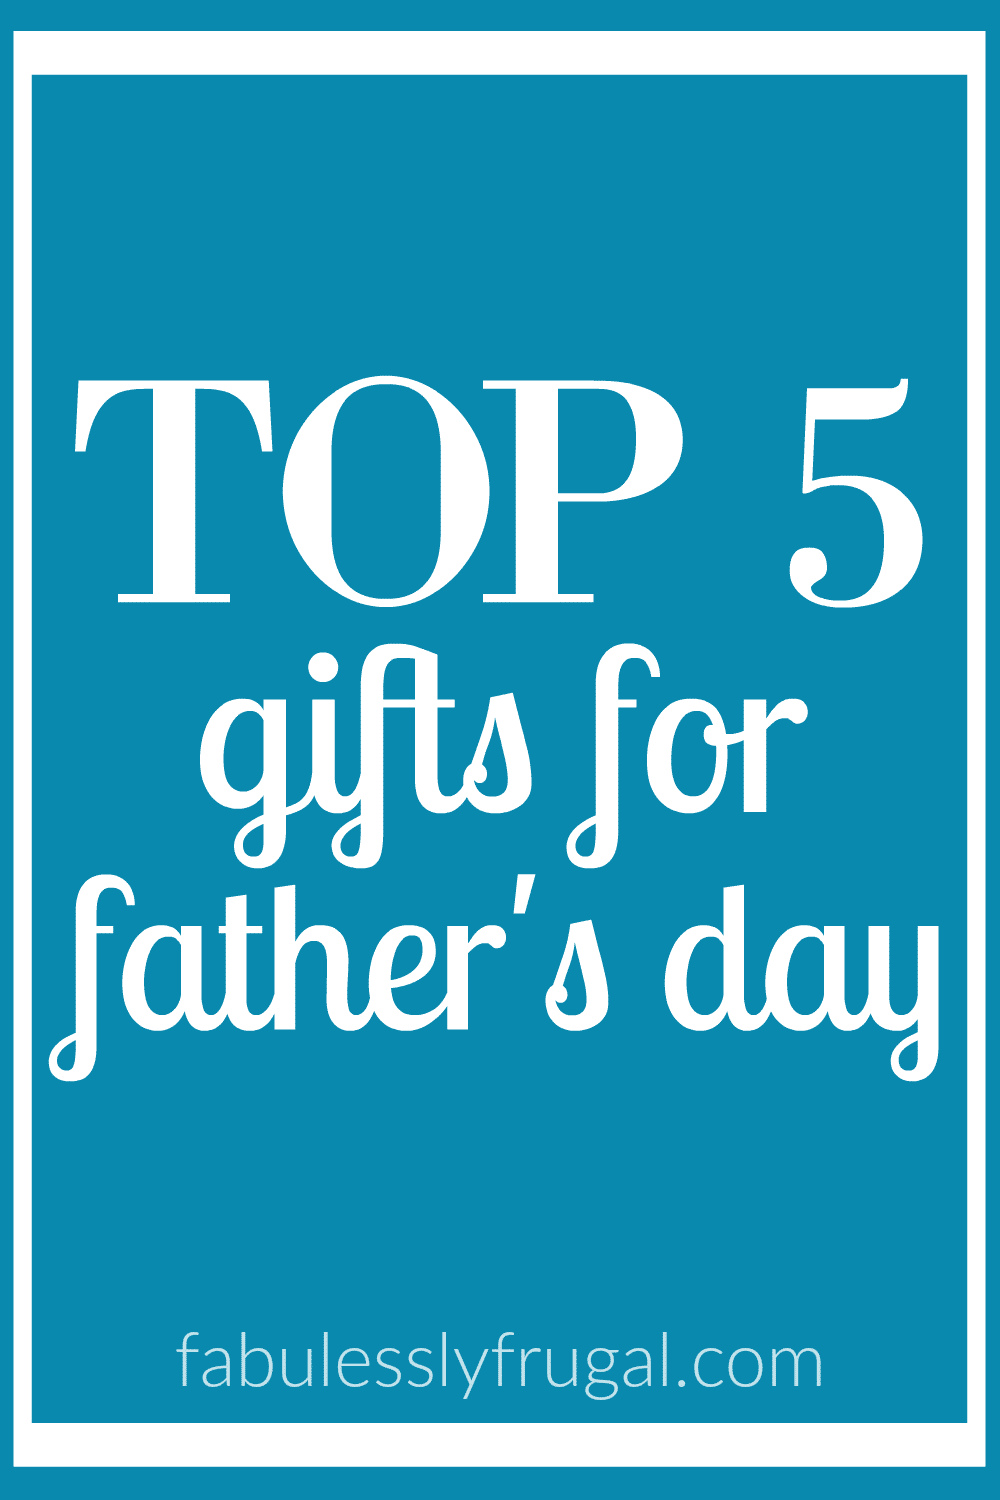 Top 5 father's day gifts to buy 